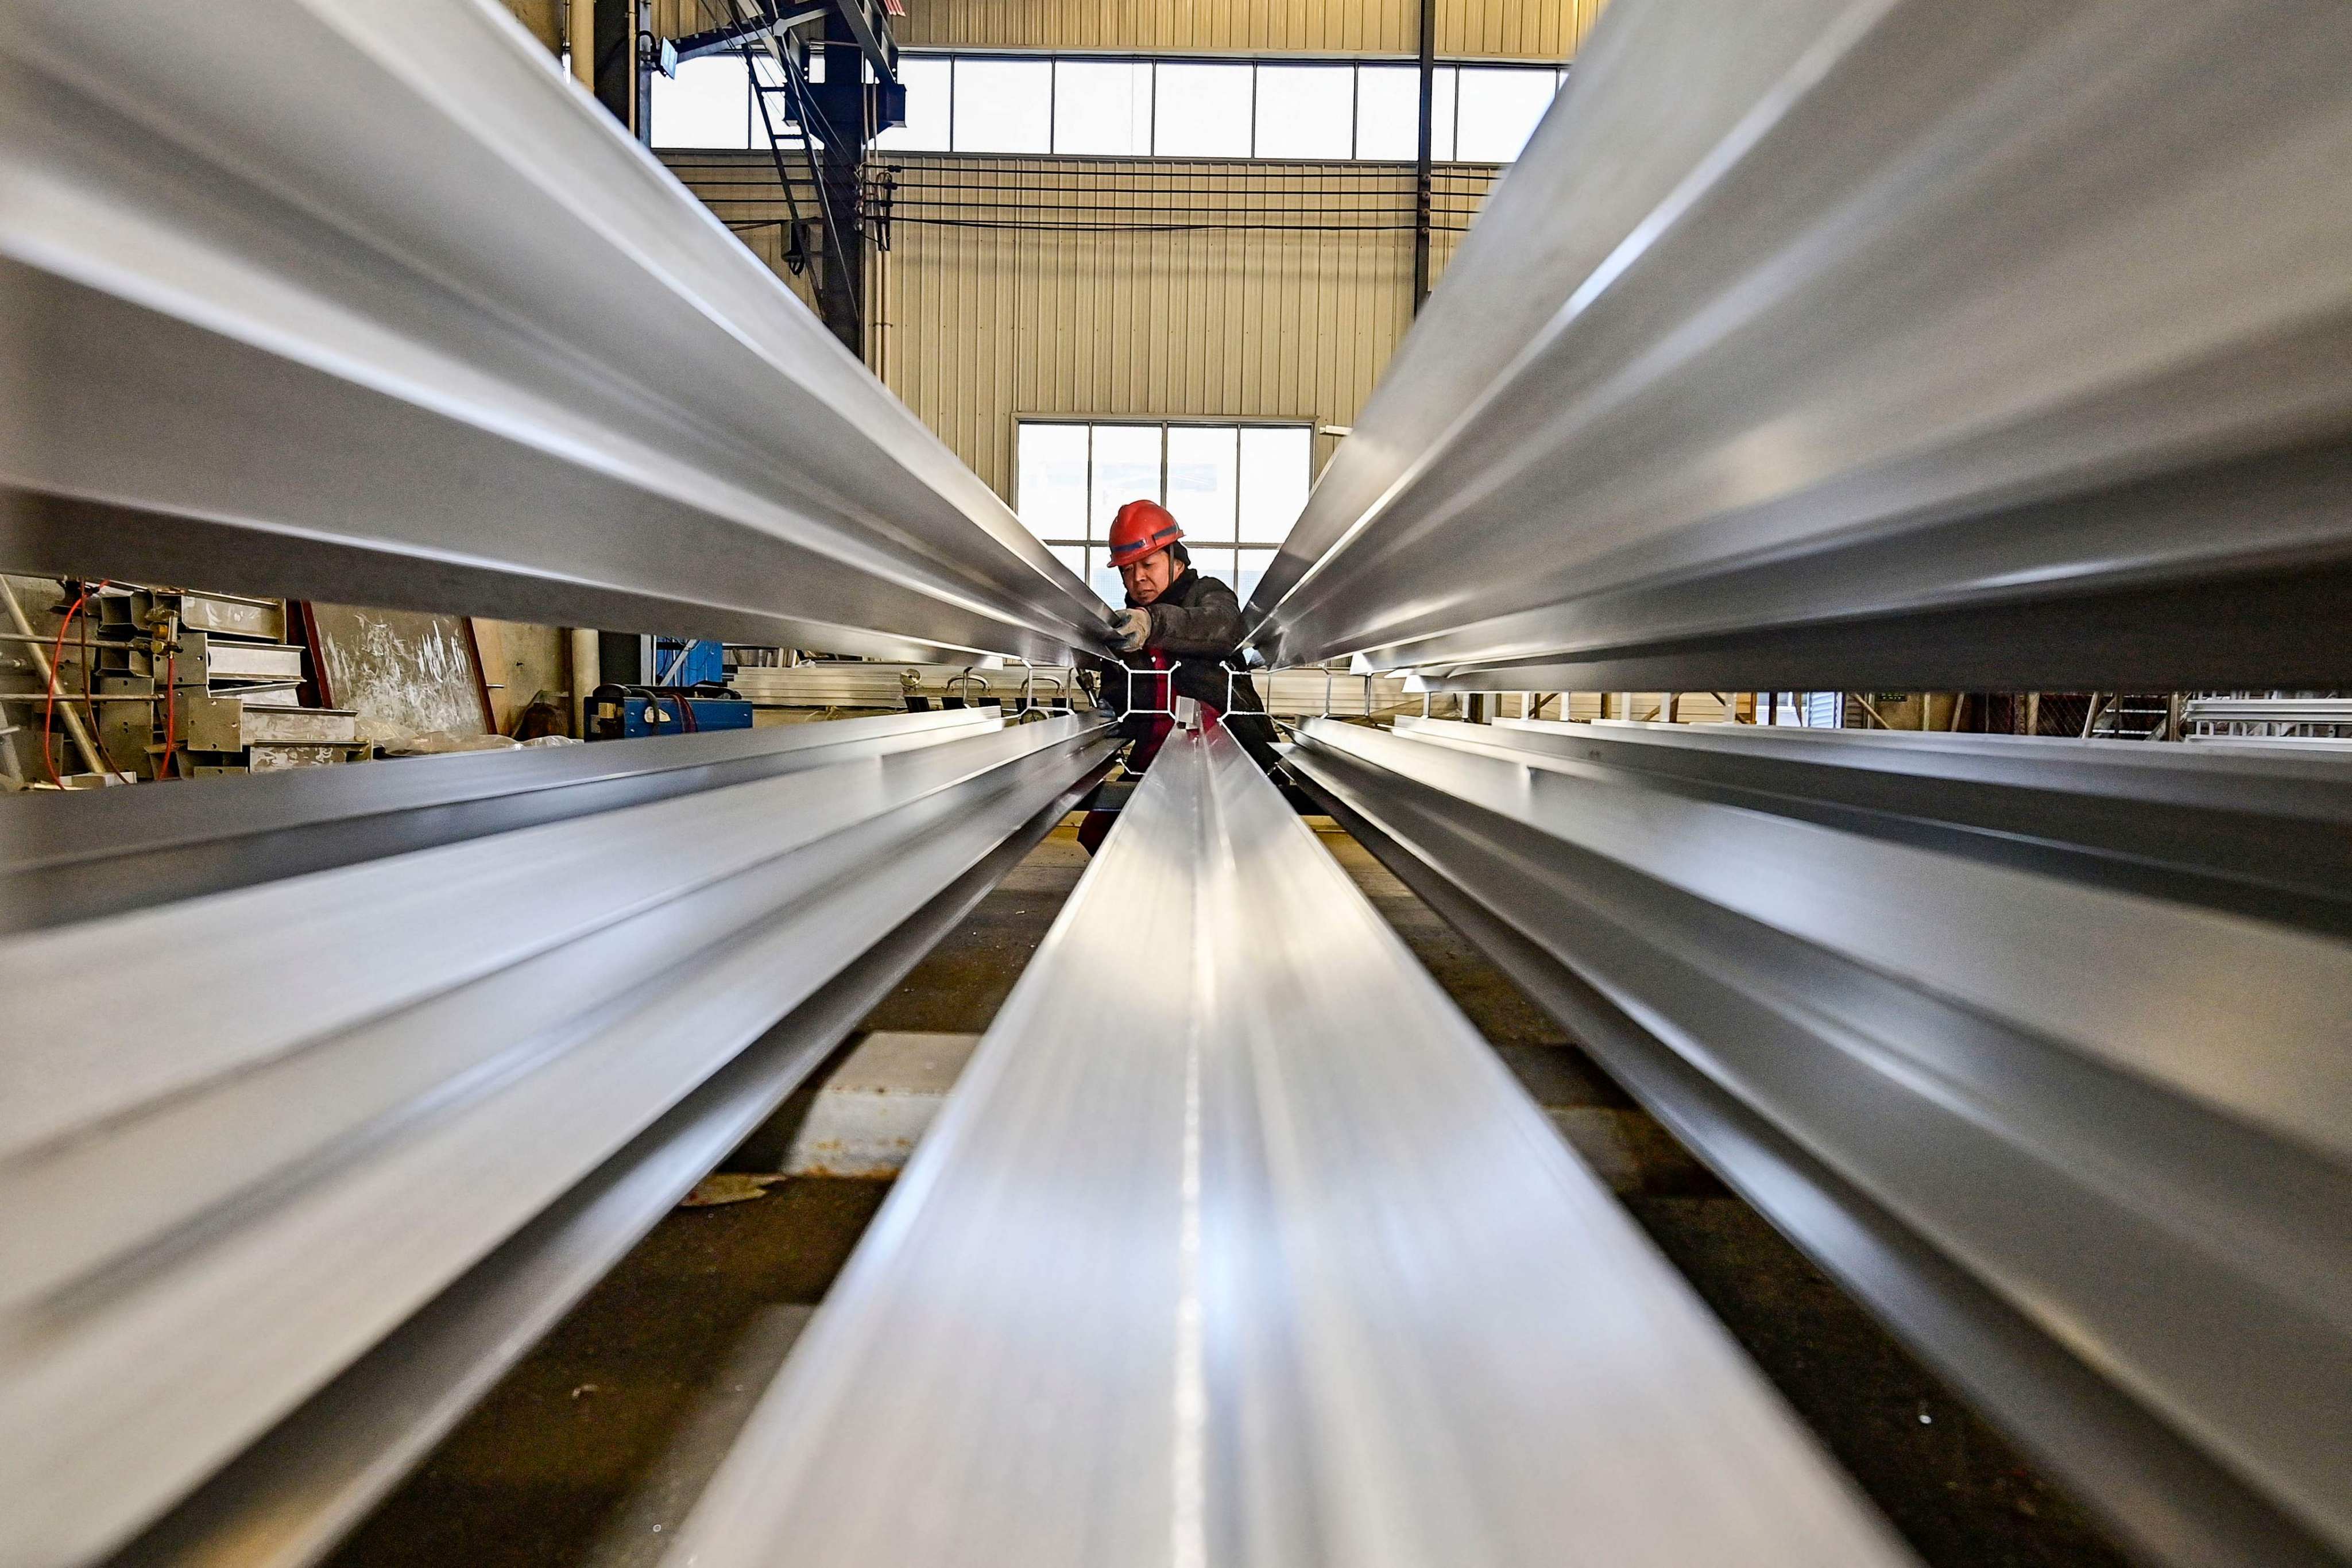 An employee works on a steel pipe at a factory in Weifang, in China’s eastern Shandong provinc. The property sector and infrastructure are two of the largest segments fuelling China’s demand for products like steel, copper and aluminium. Photo: AFP